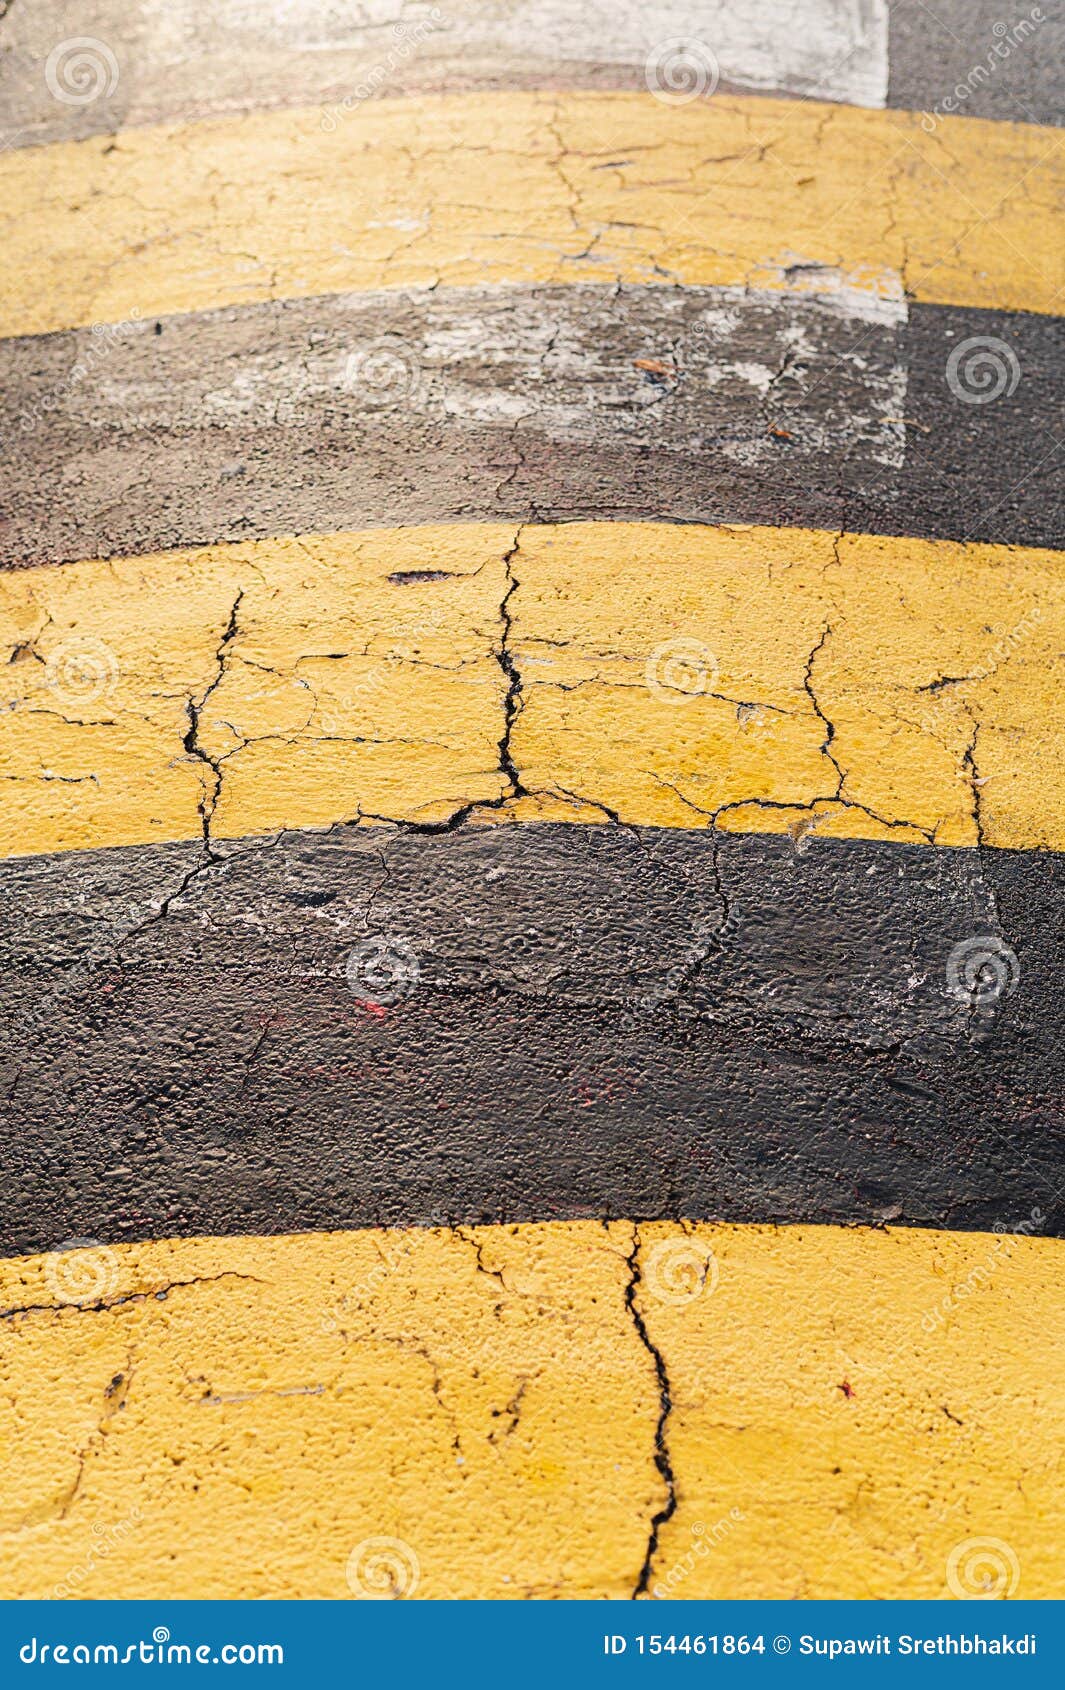 Closeup Cracked Yellow Stripes Concrete Speed Bump With Yellow Sunlight